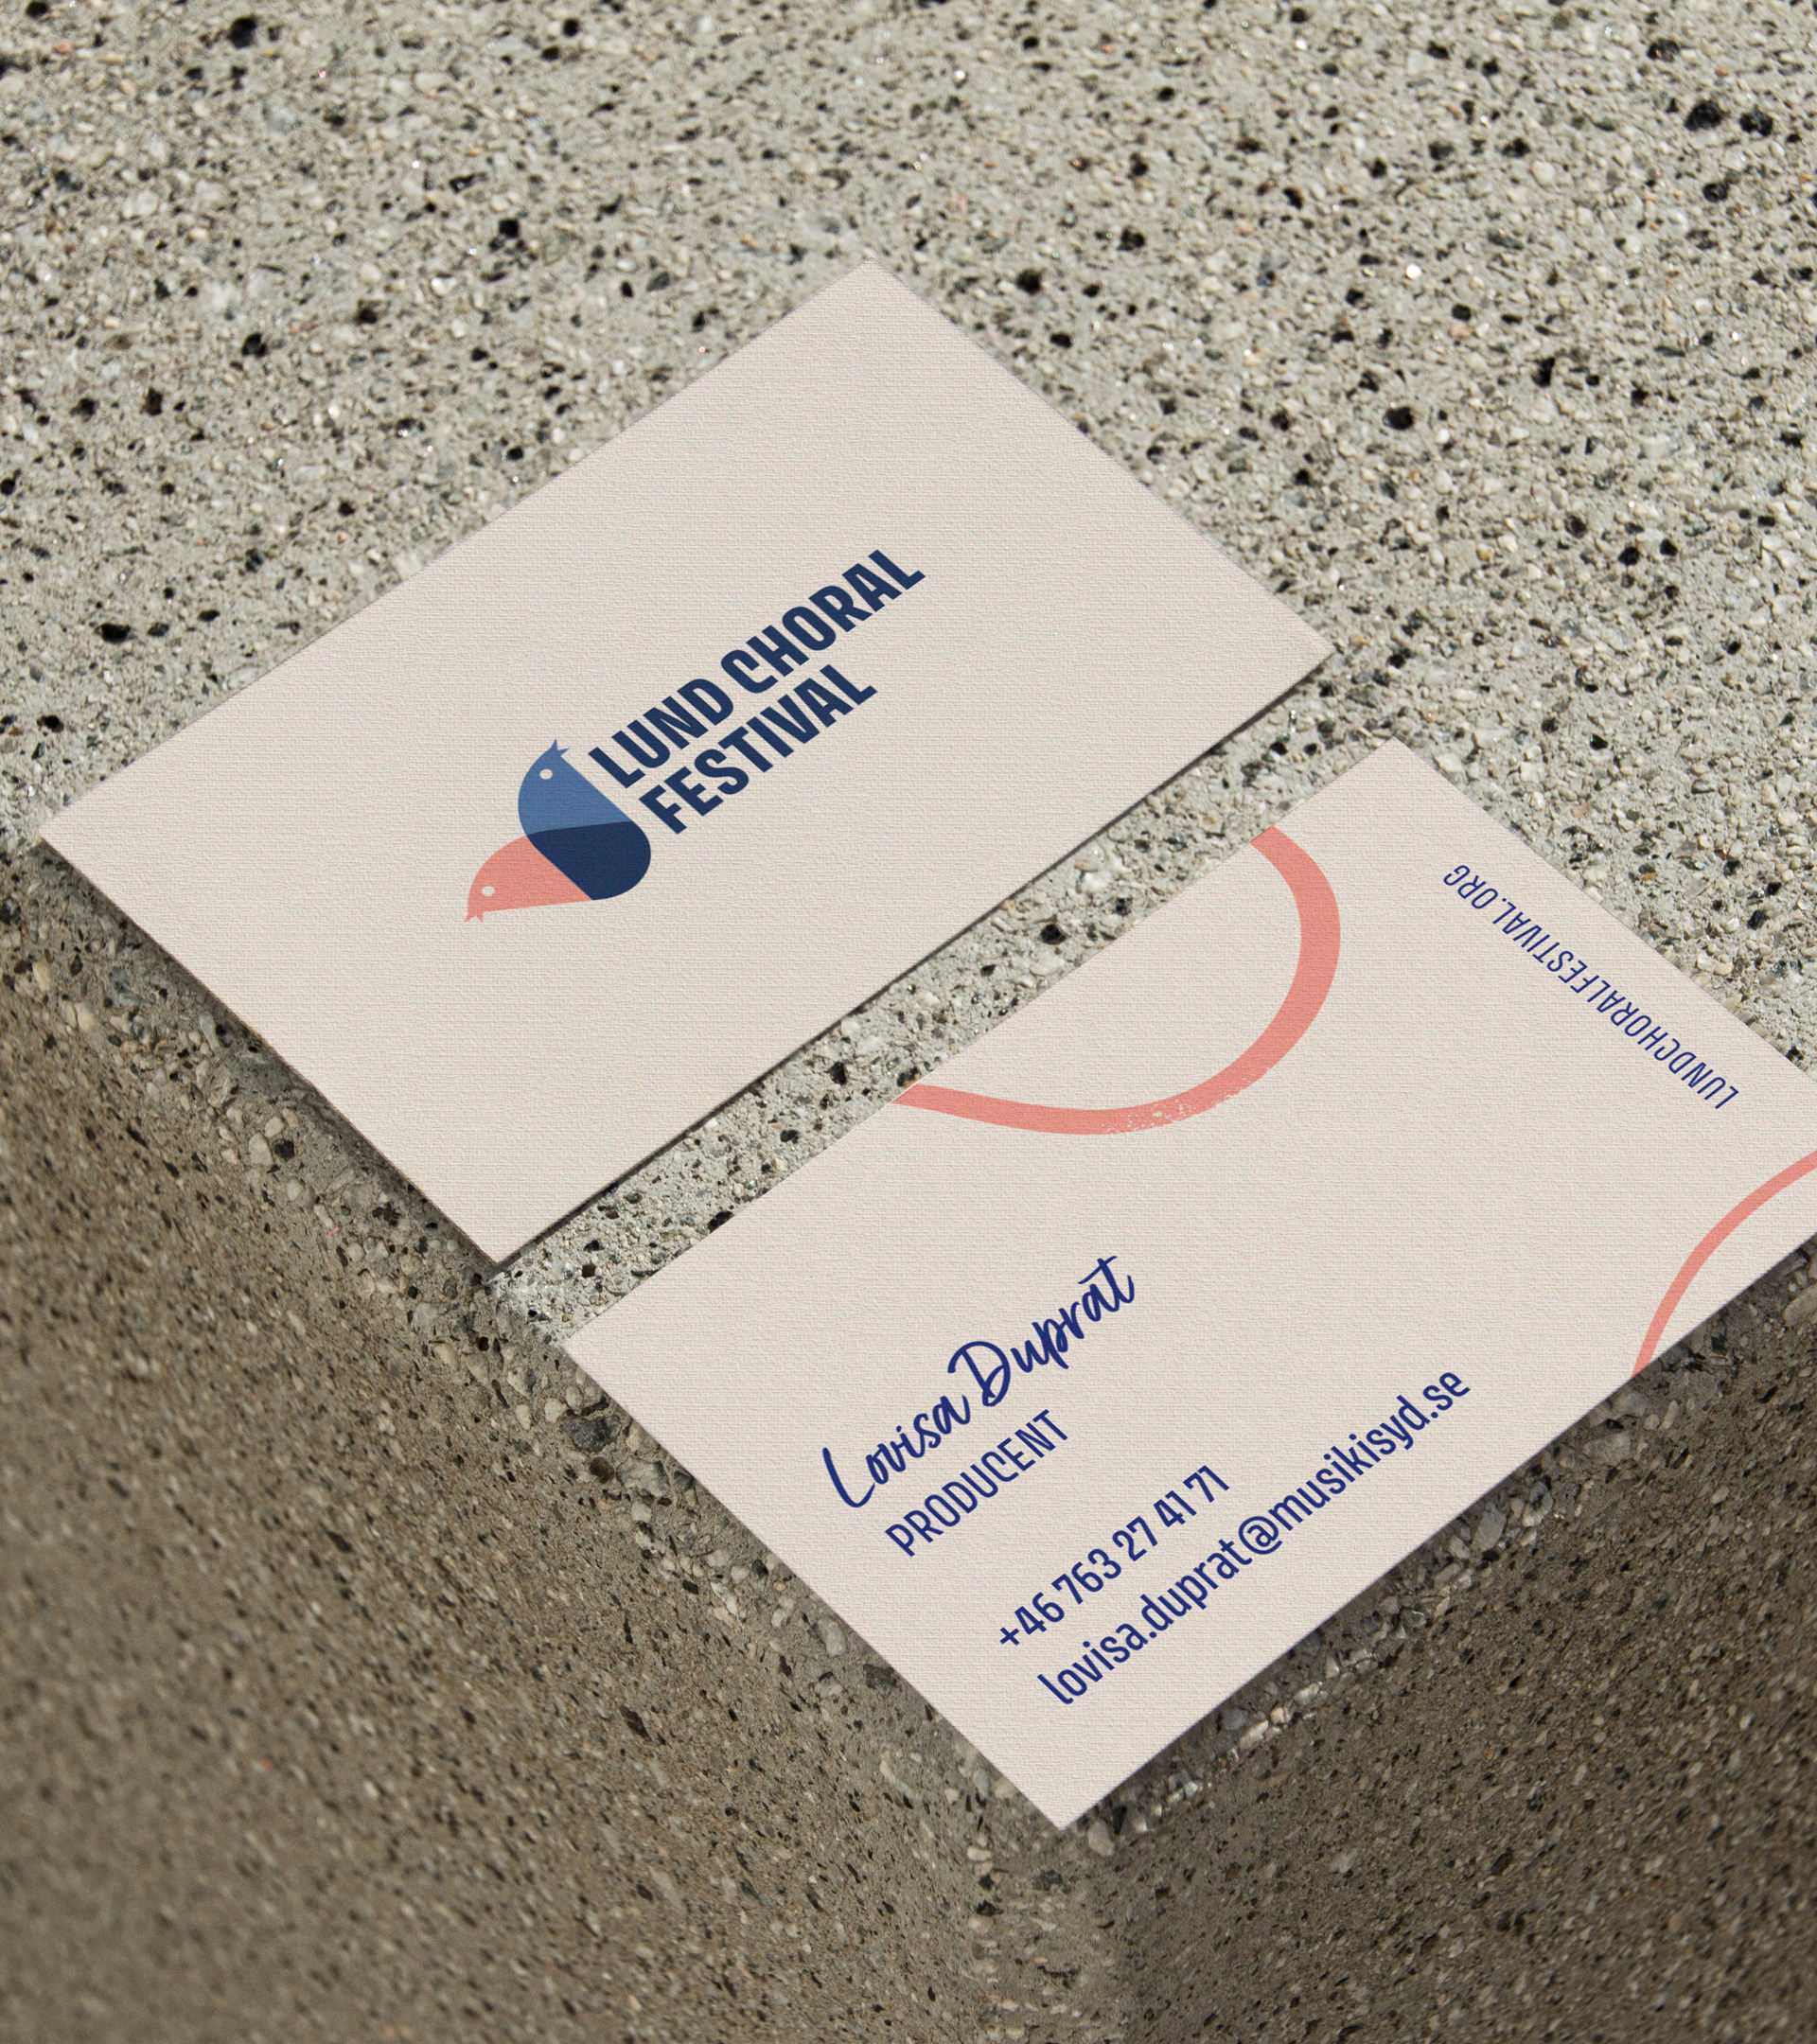 Business card for Lund choral festival designed by Studio Poi